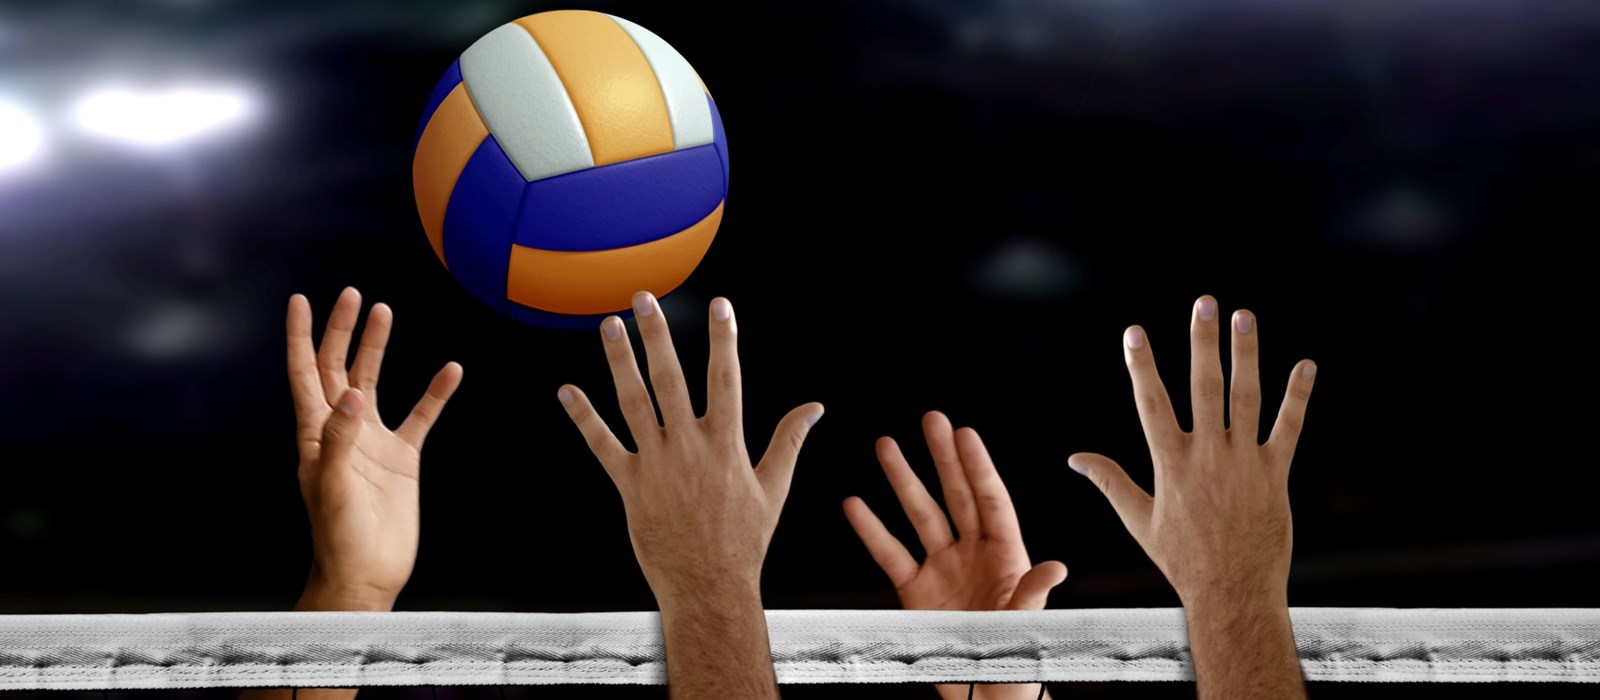 Hands reaching above a net for a volleyball